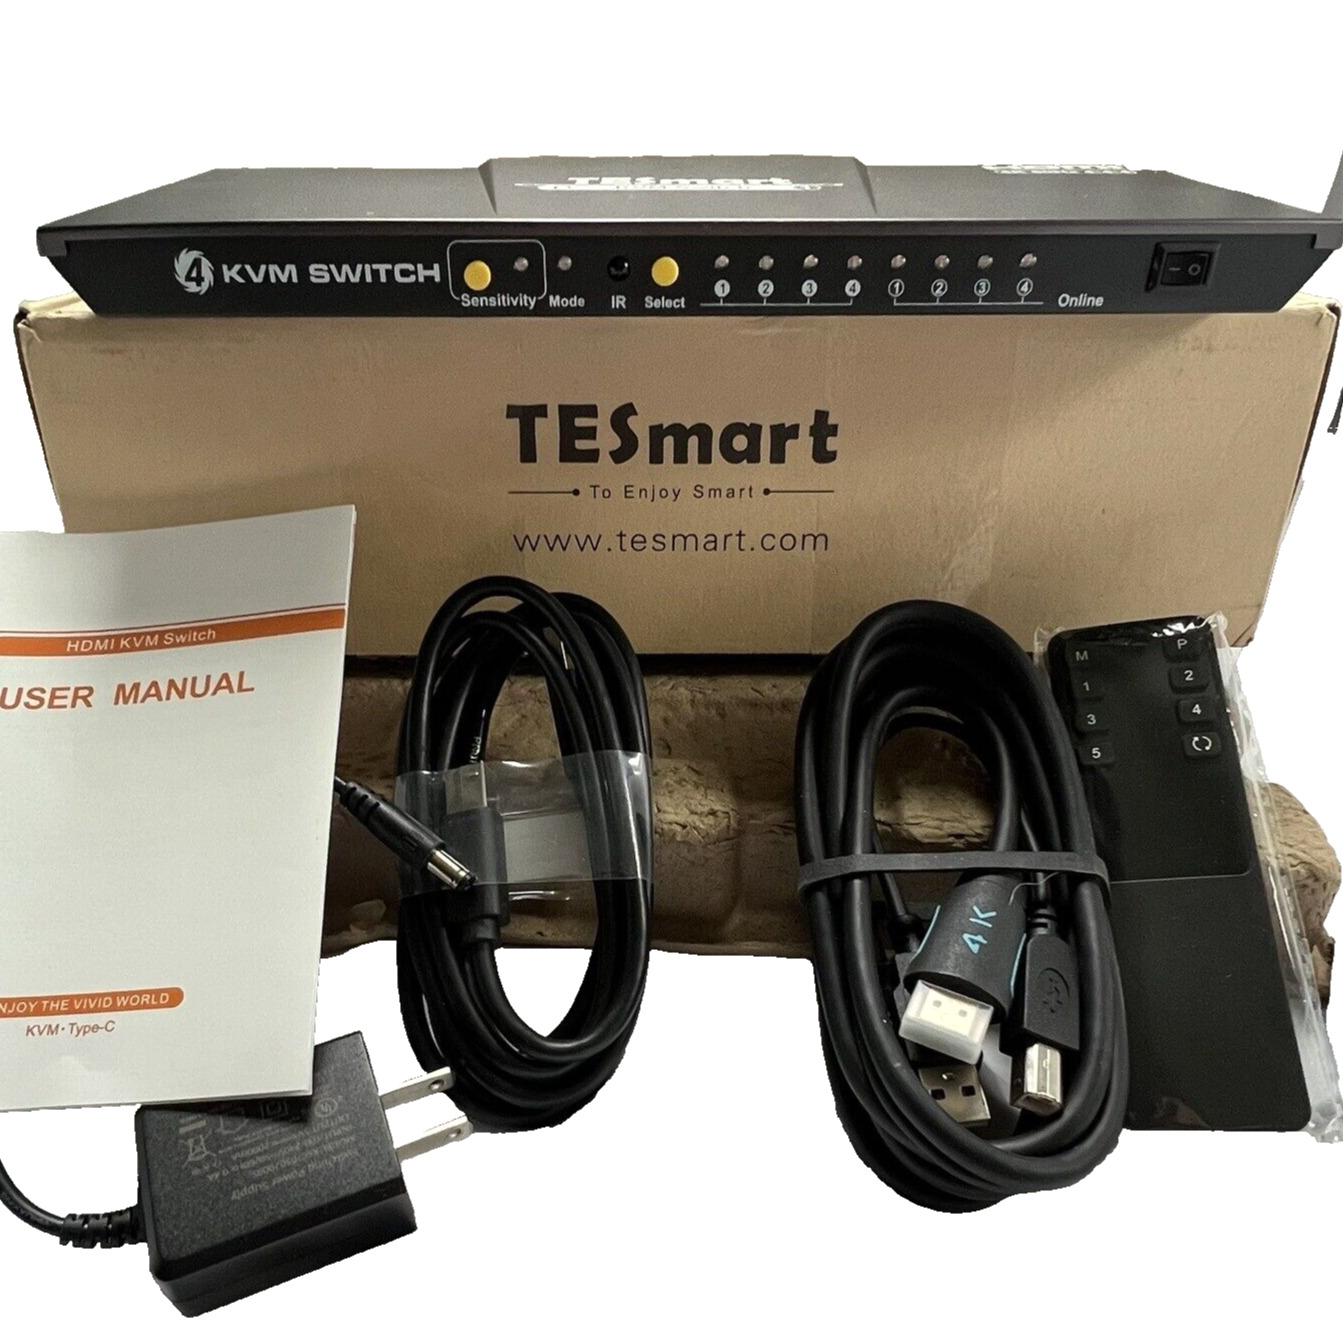 TESmart 4K 4-Port HDMI KVM Switch W/Power Adapter Remote cables manual